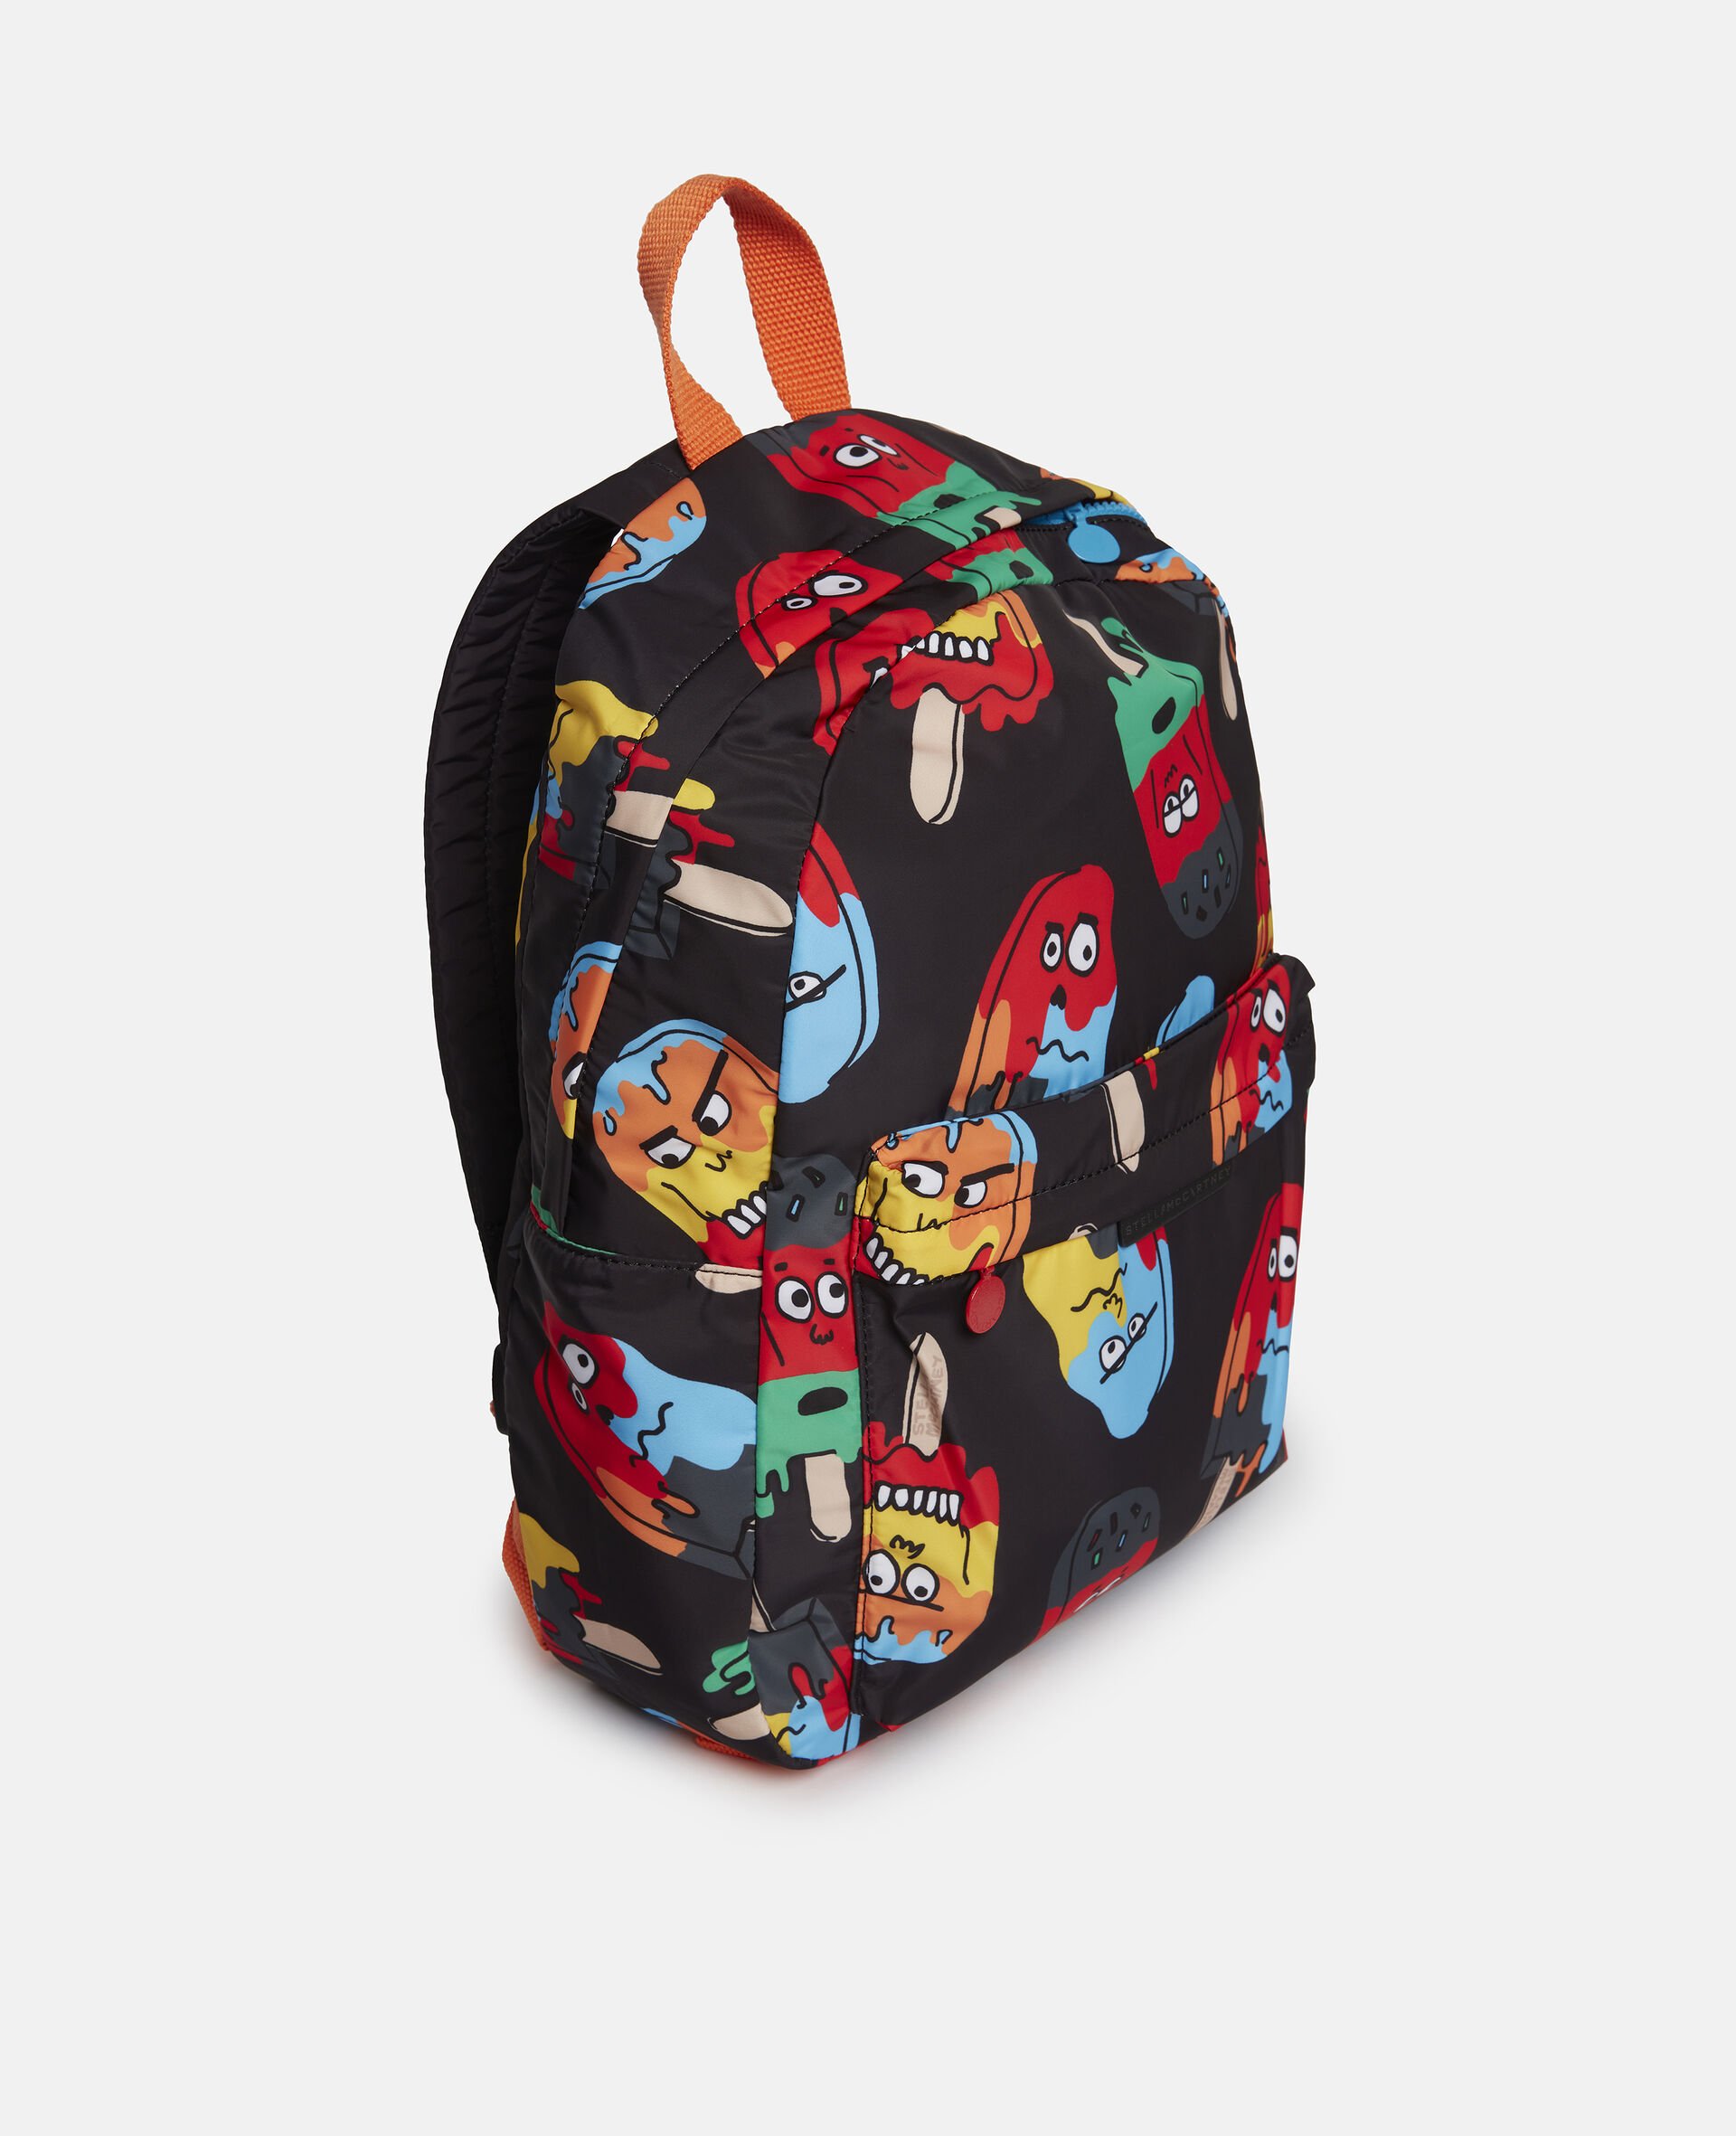 Ice lolly Backpack-Black-large image number 1